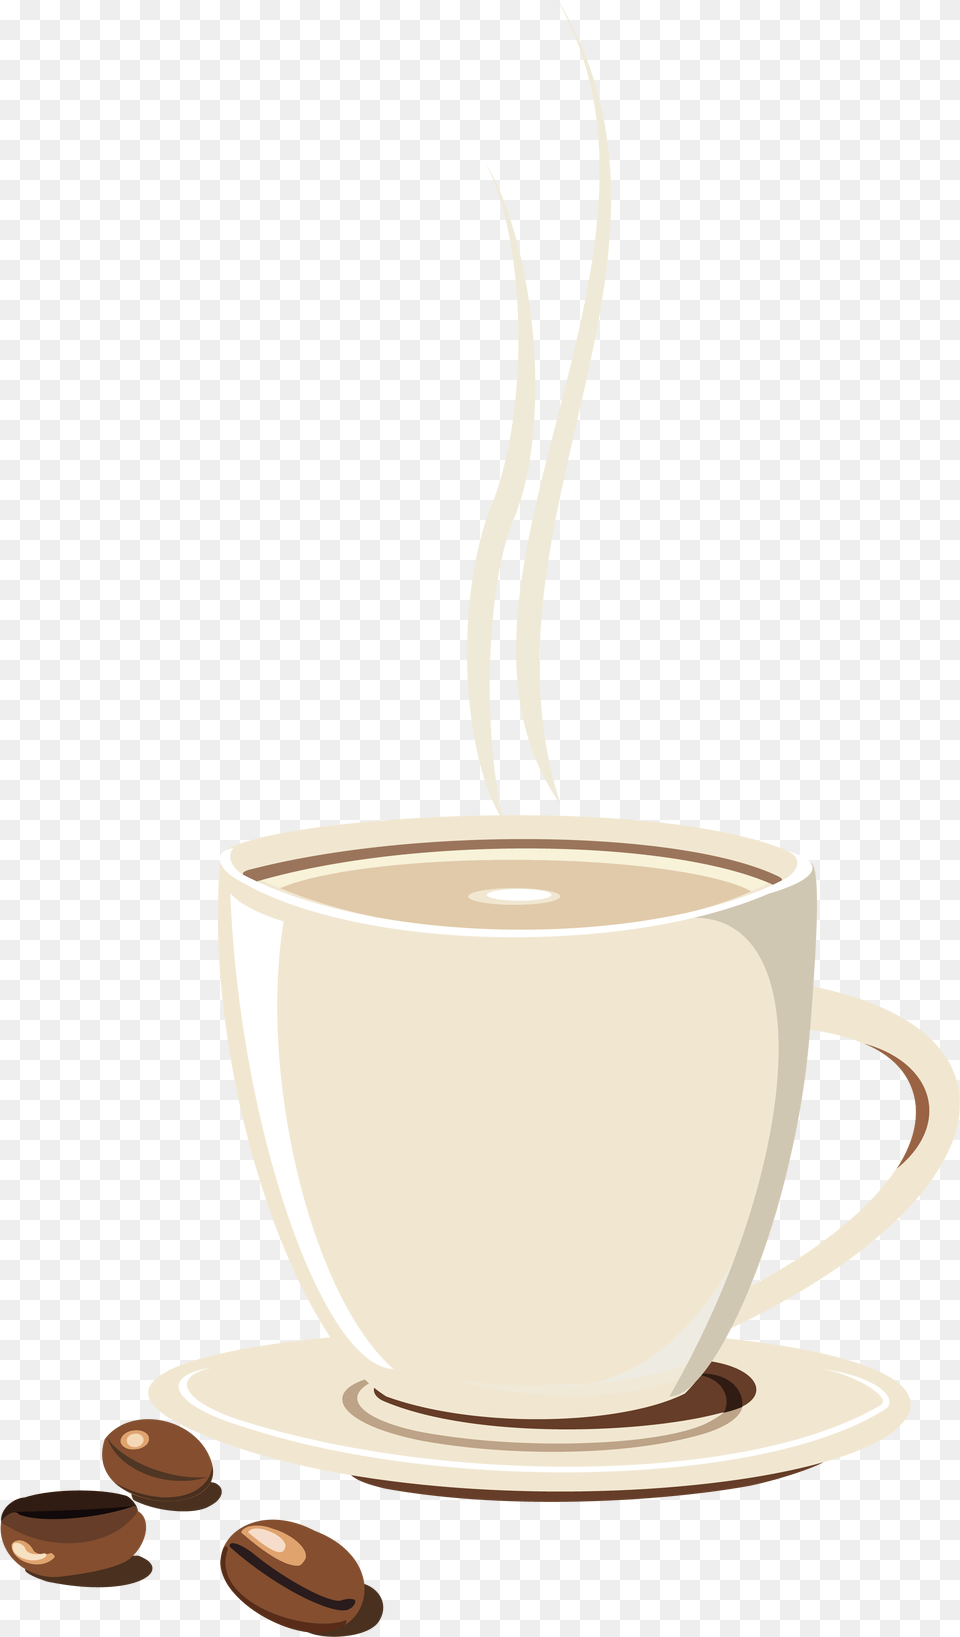 Coffee Cup Clipart Coffee Vector Illustrations Coffee Vintage Coffee Cup, Saucer, Beverage, Coffee Cup Free Png Download